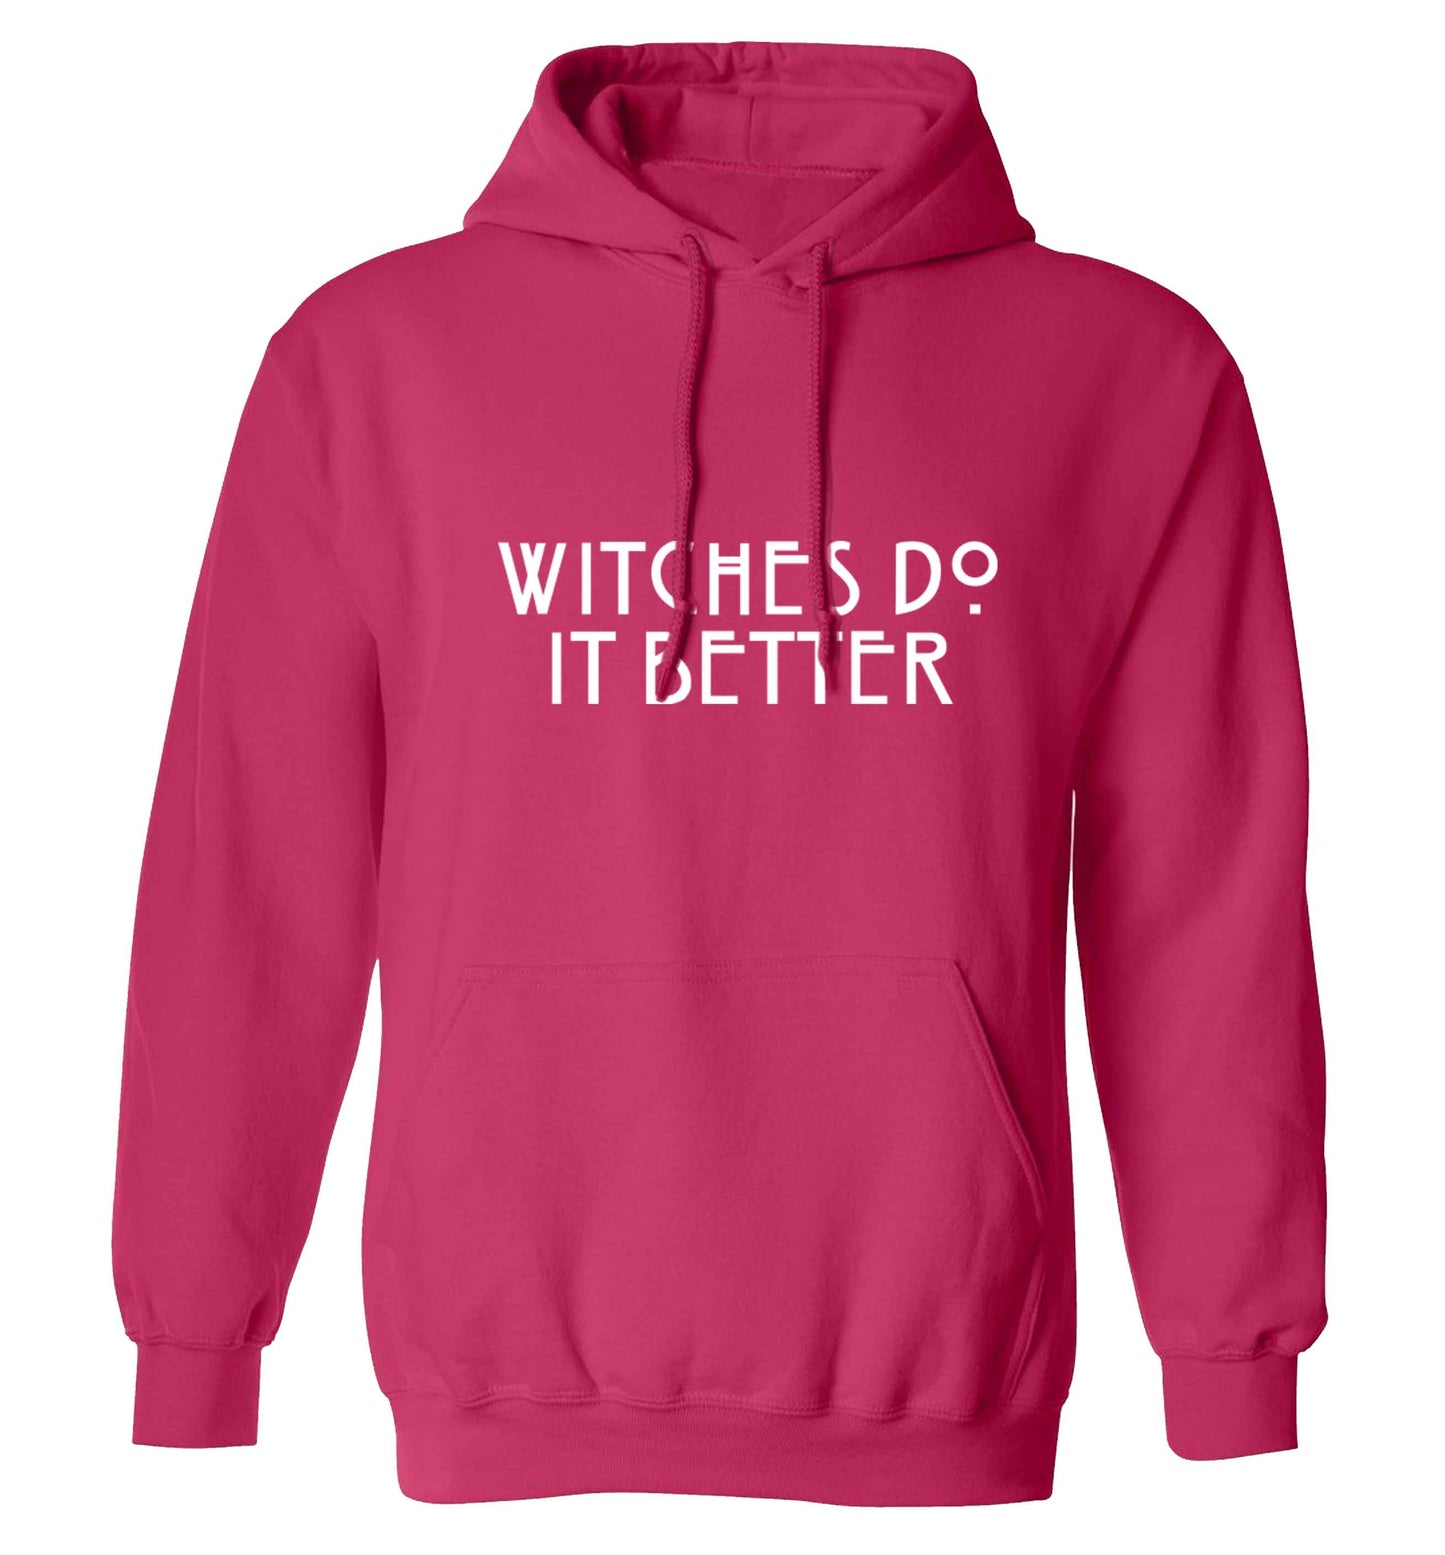 Witches do it better adults unisex pink hoodie 2XL